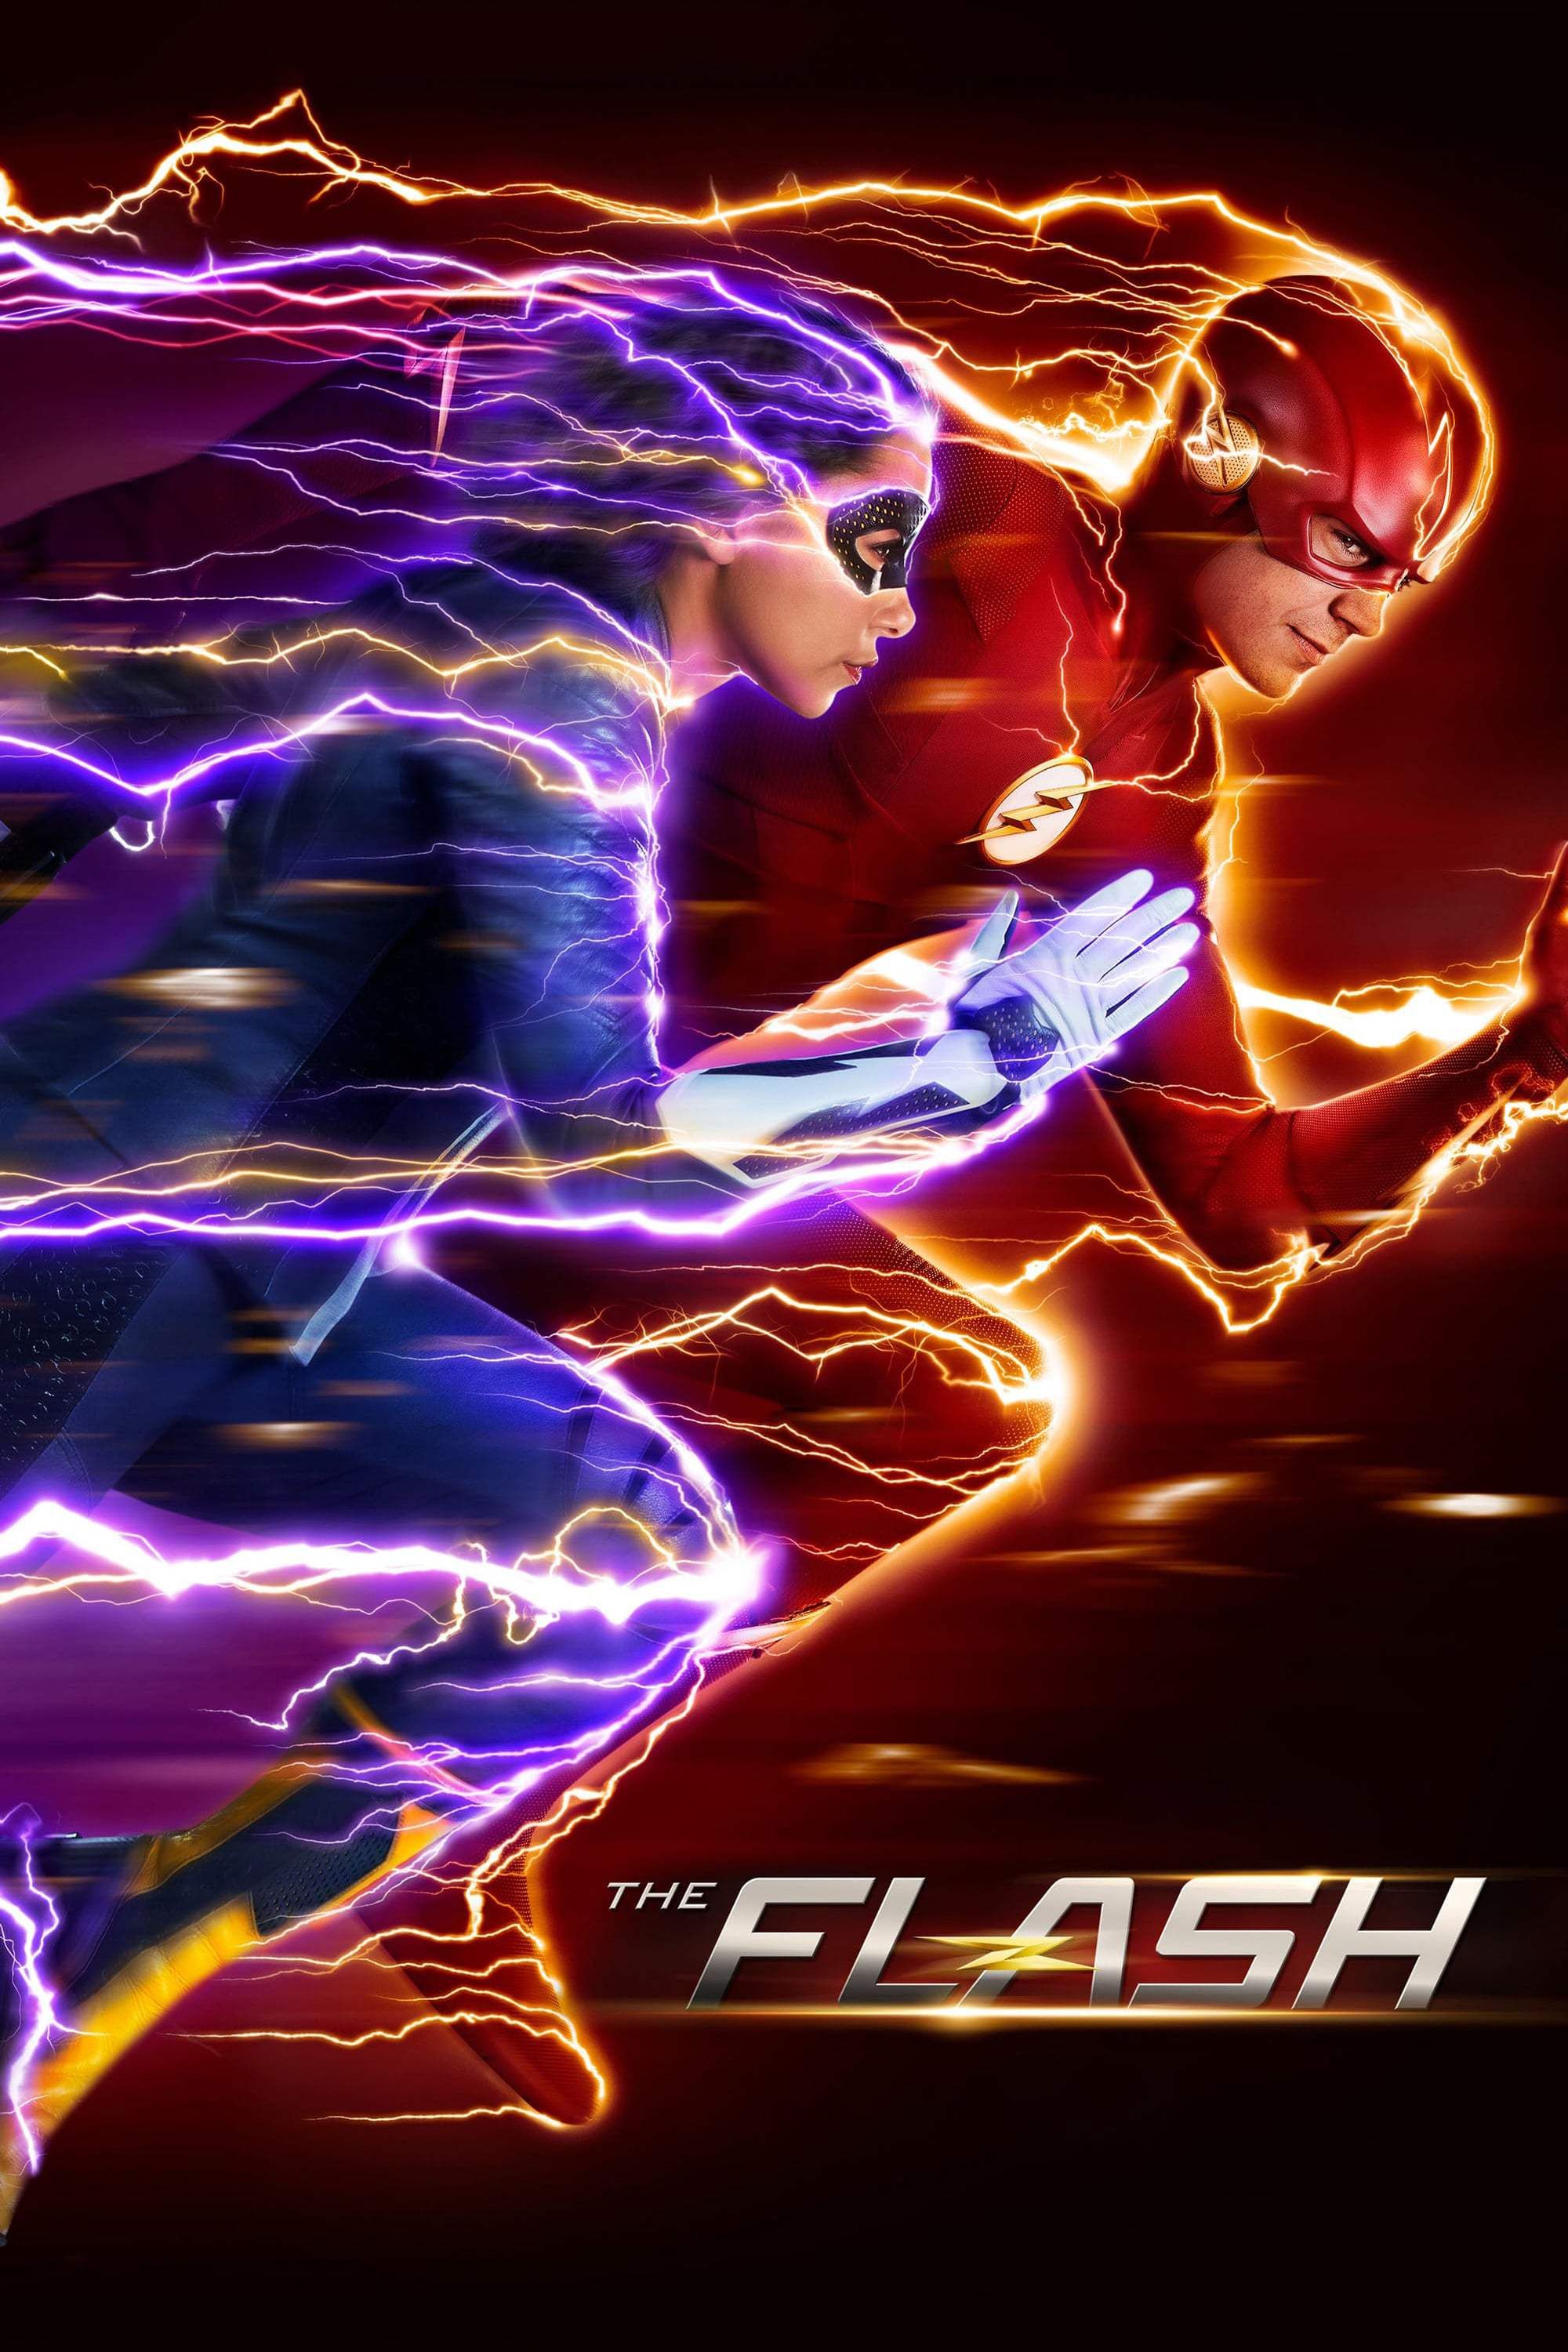 The Flash In Hindi Movie Dubbed Watch Online